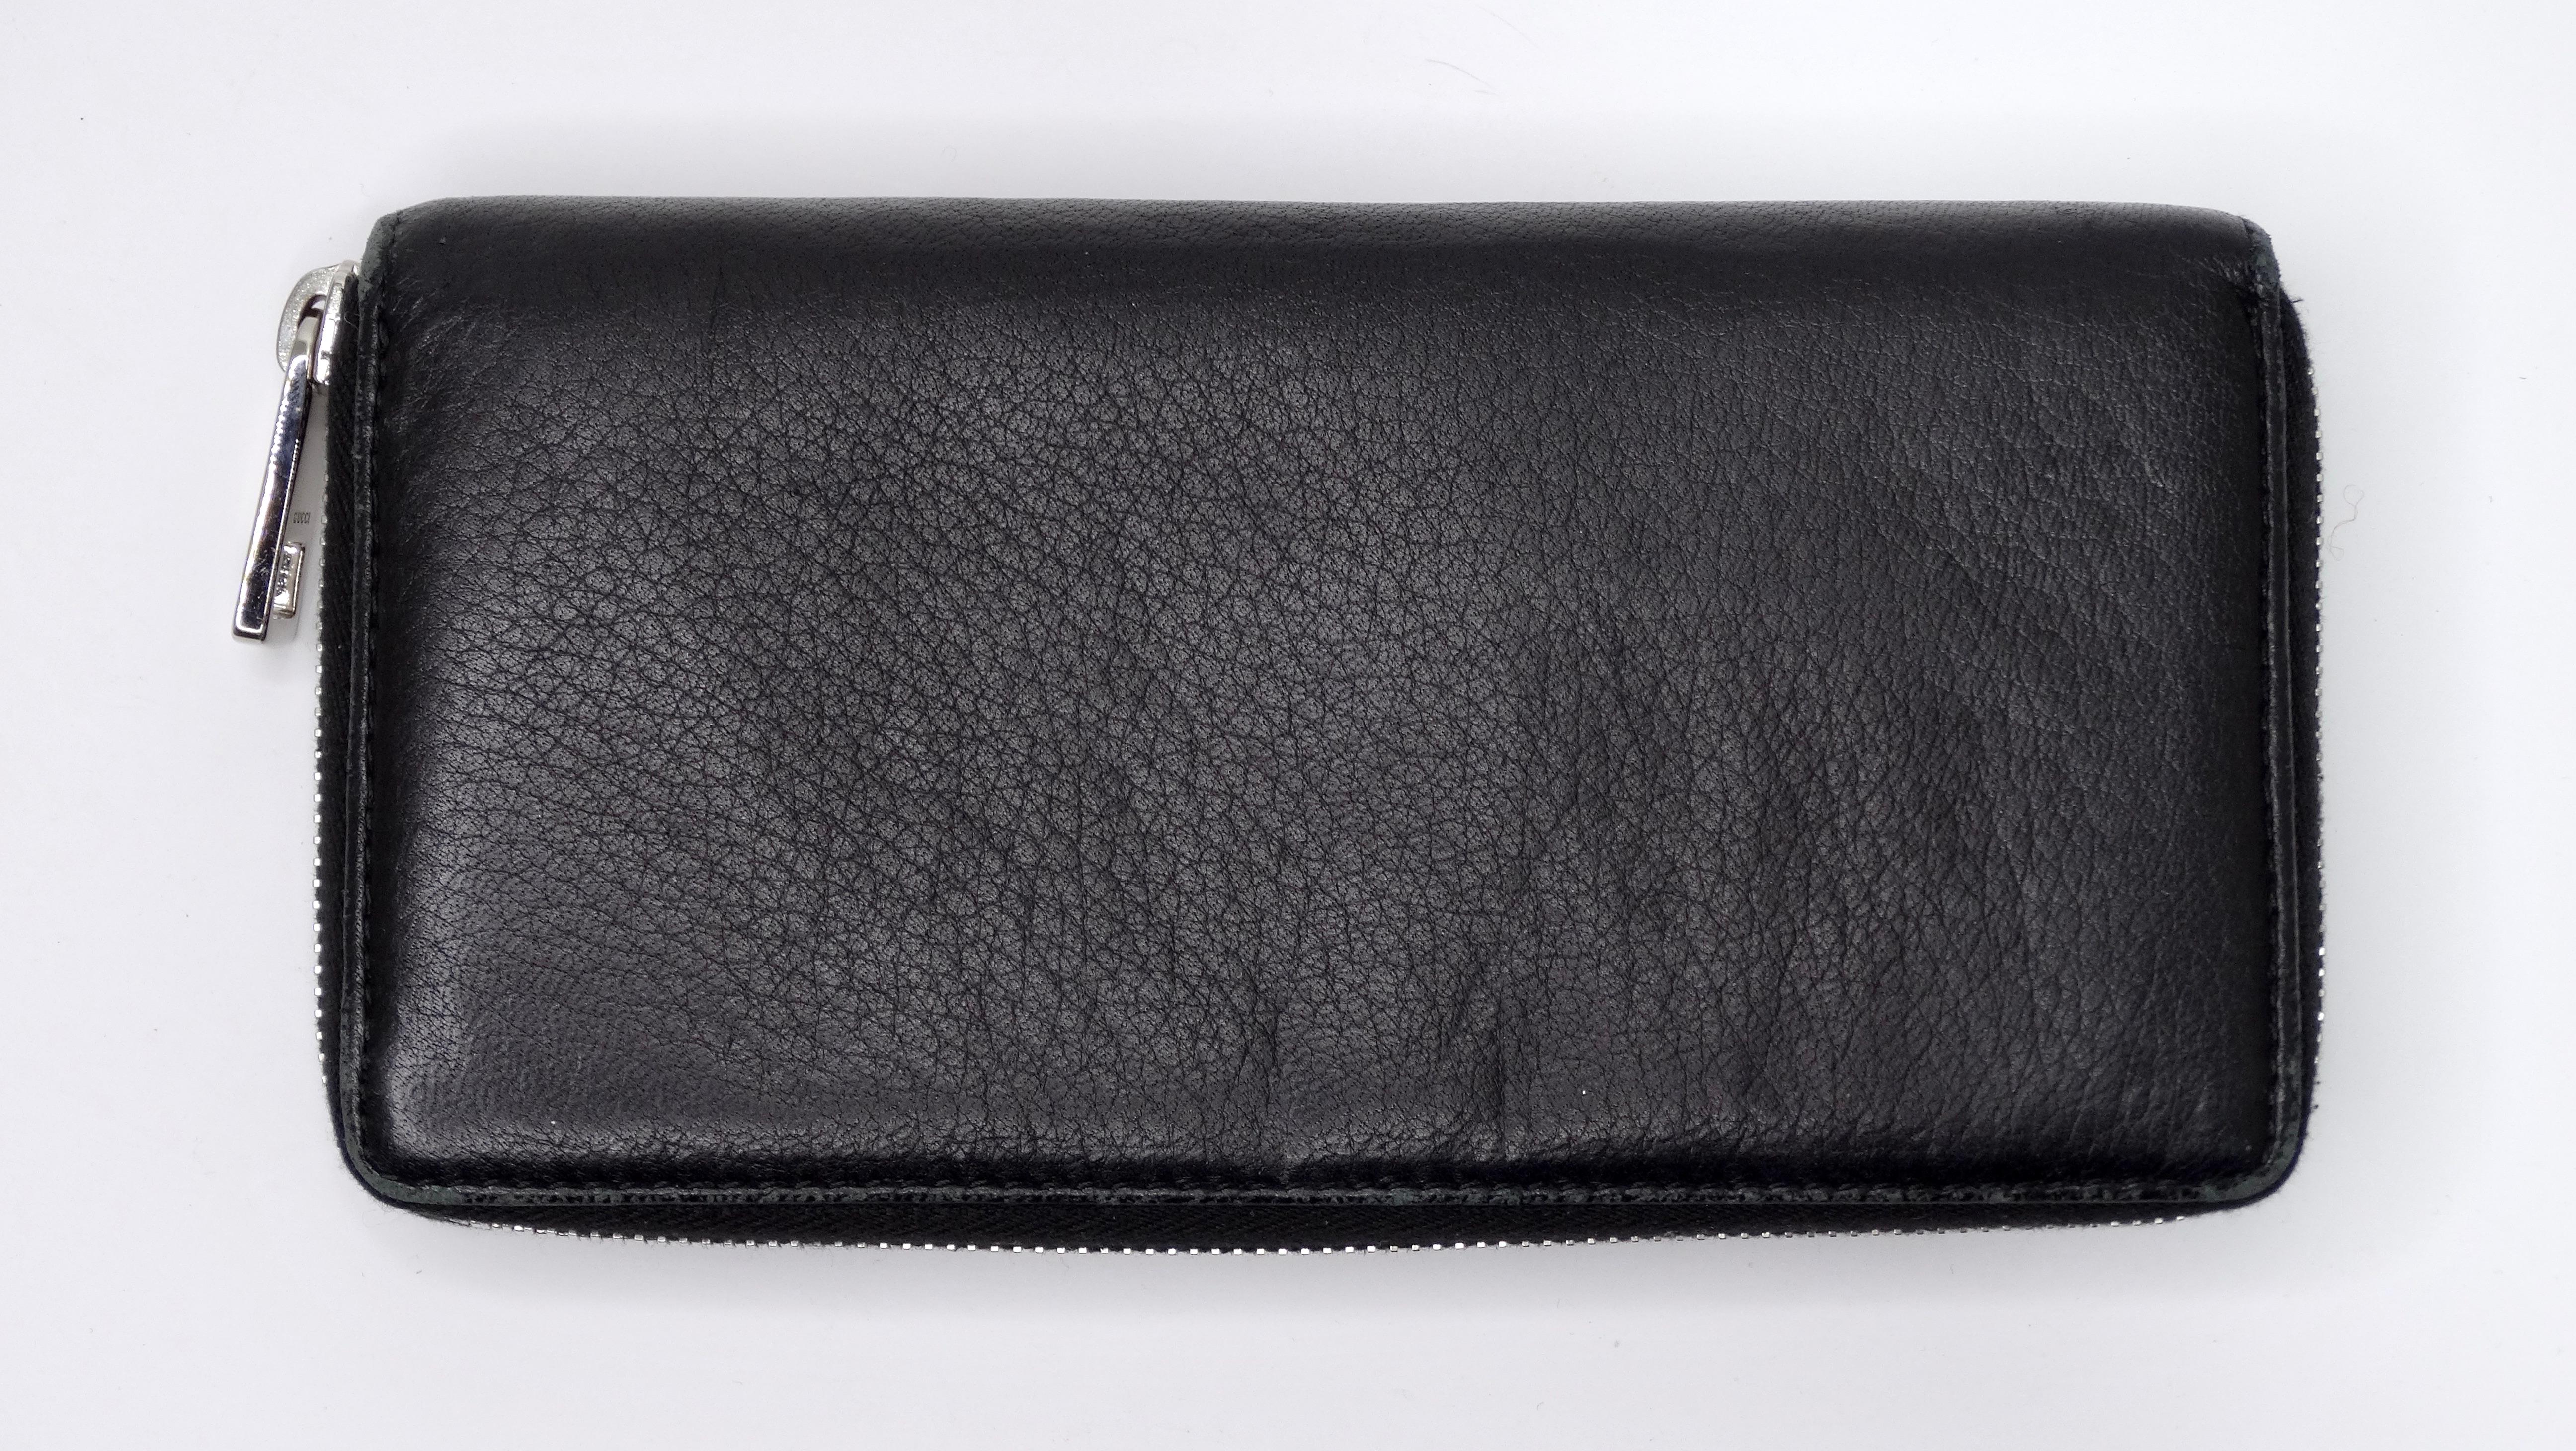 Grab yourself a piece of the iconic house of Gucci with this beautiful wallet! This is a great piece to carry all of your money and even use as an organizer for your handbag. This is made of a buttery soft leather with a monochromatic interlocking